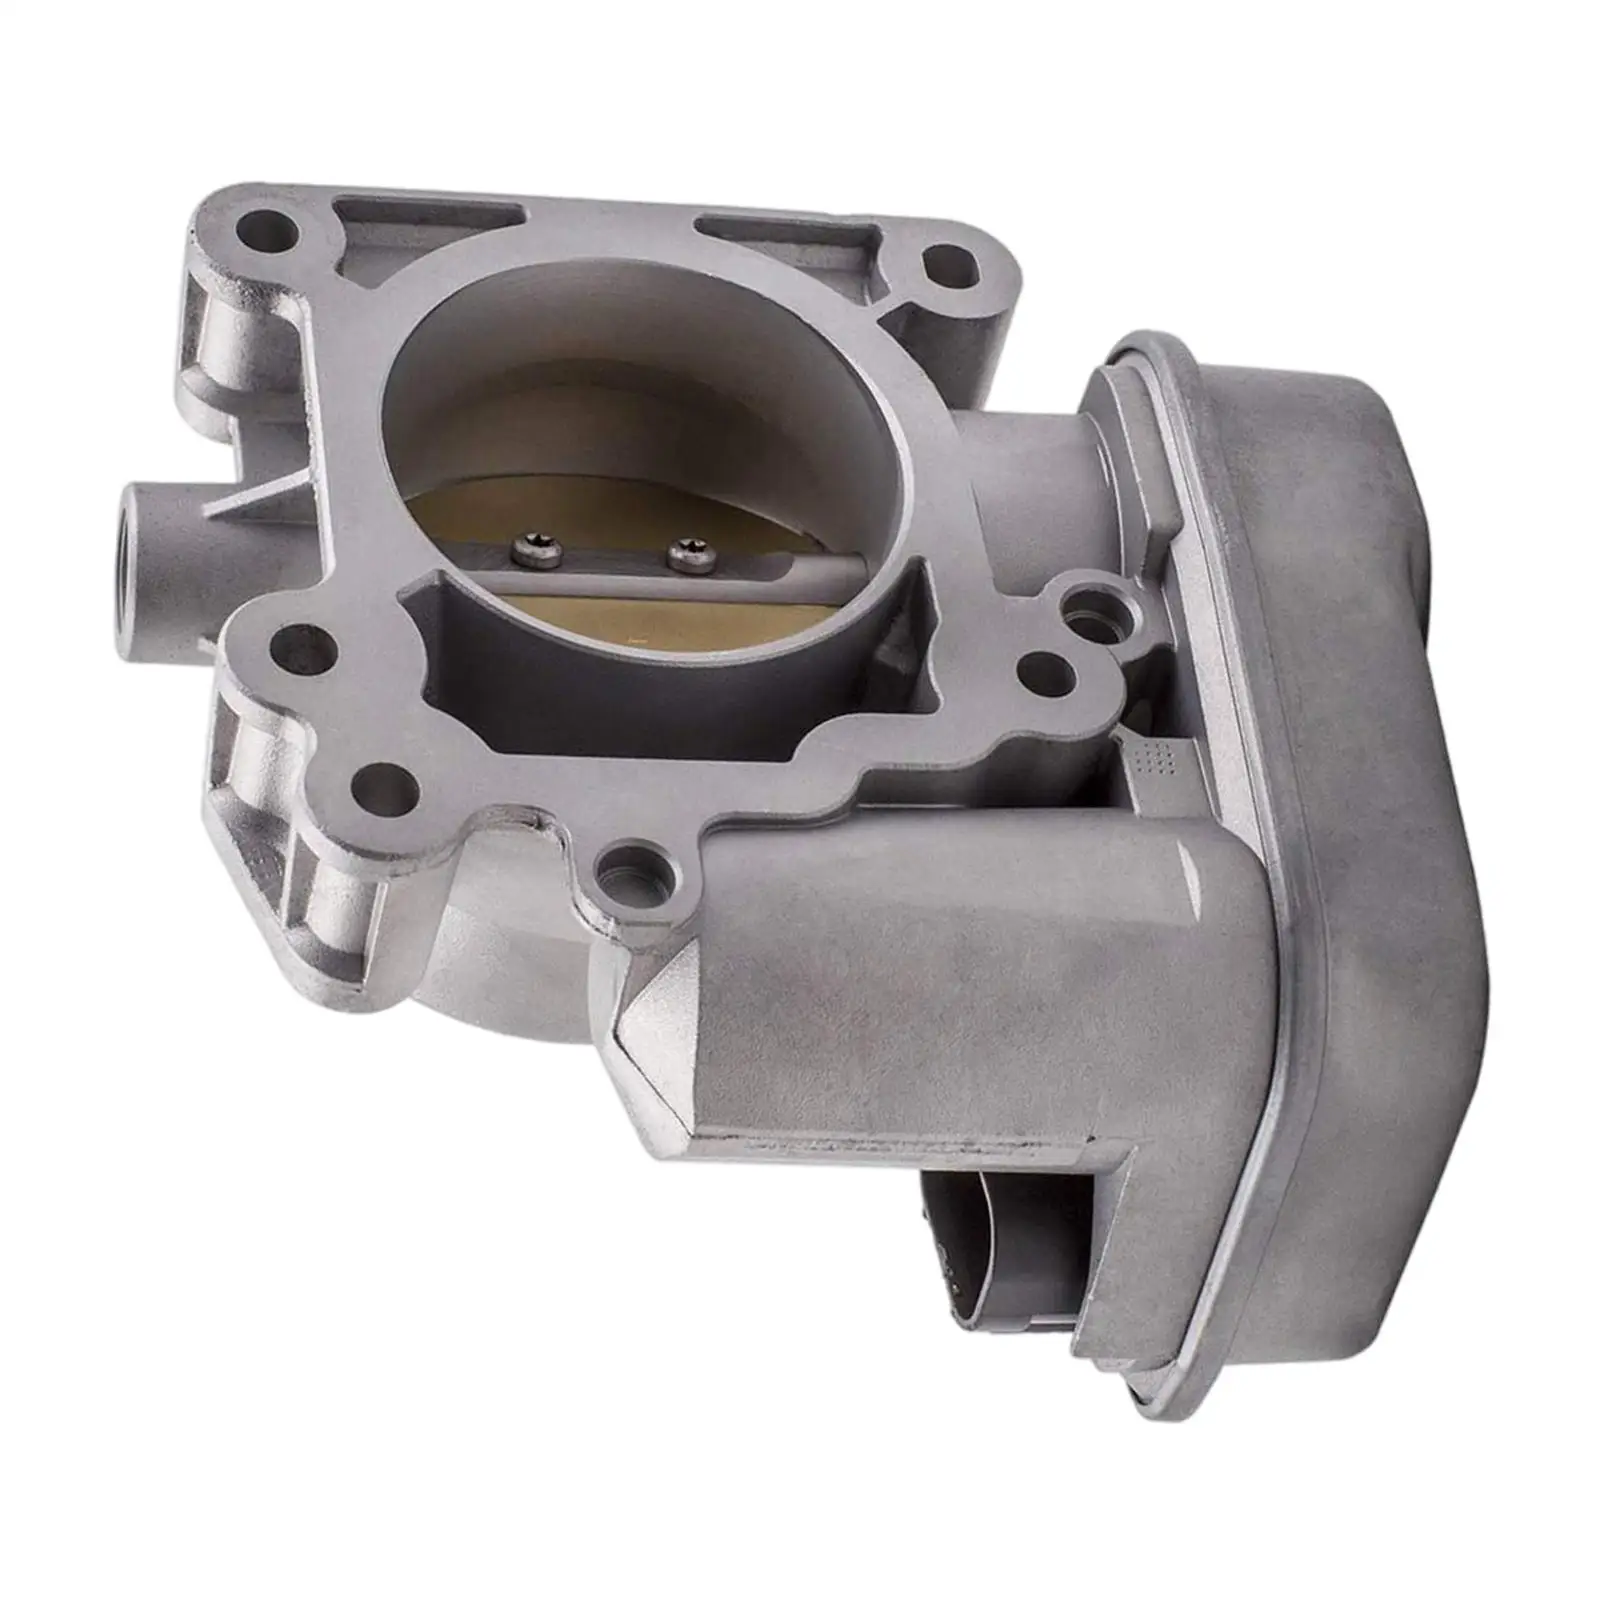 Throttle Body Aembly Fit for  HHR 1ST L4 2.2L 2006 12568796 Mounding